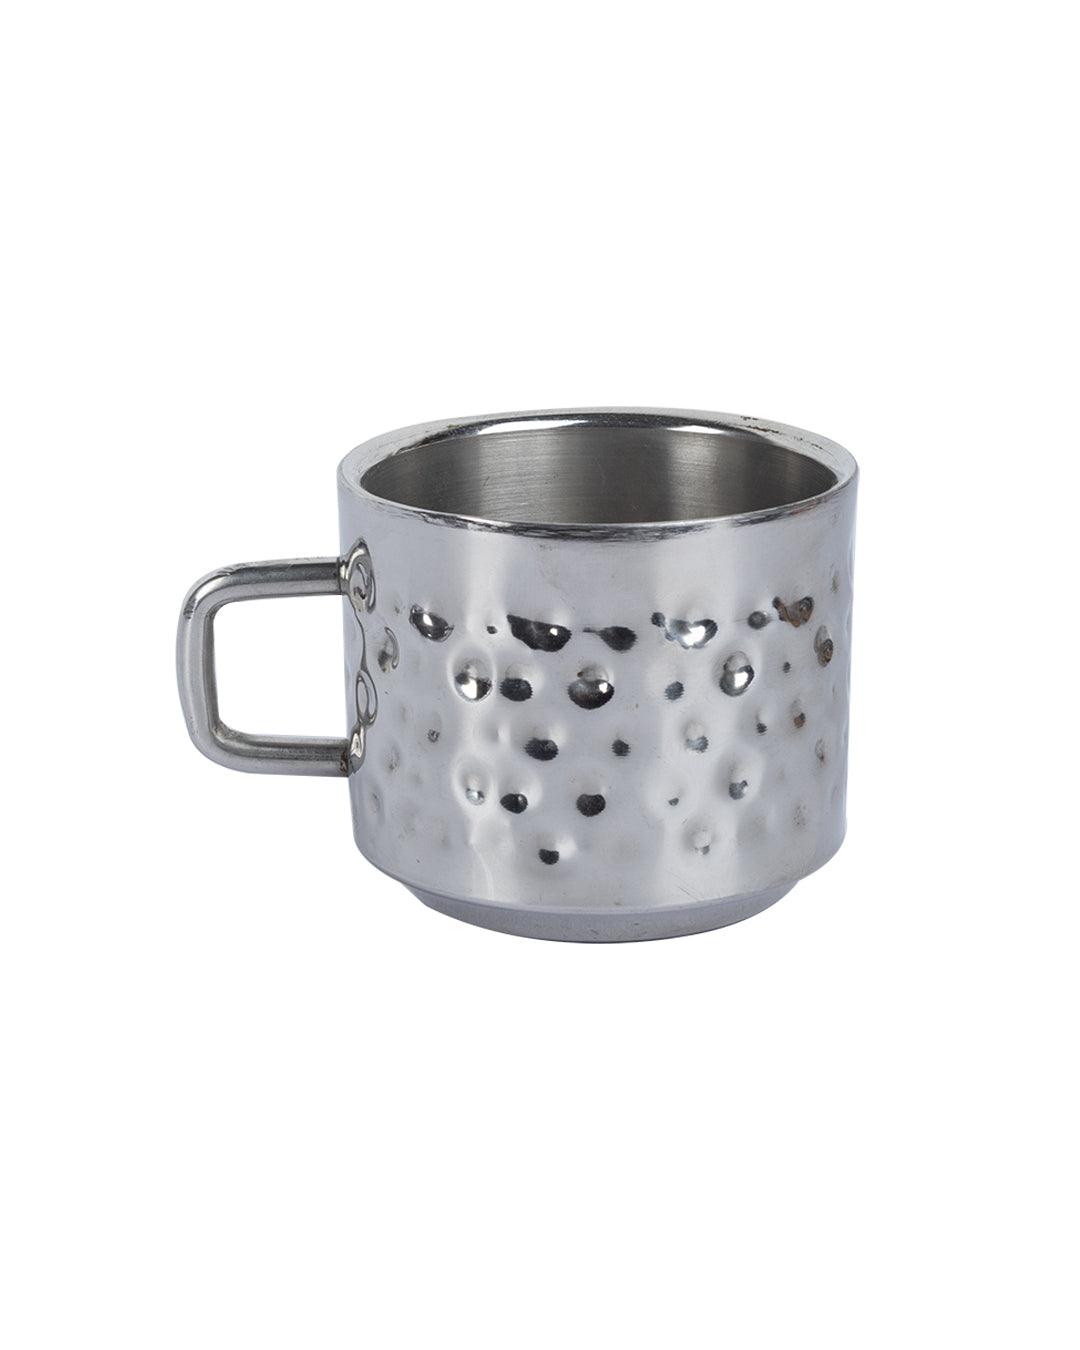 Market 99 Stainless Steel Hammered Tea & Coffee Mugs ( Set Of 4, 100mL, Silver Colour ) - MARKET 99